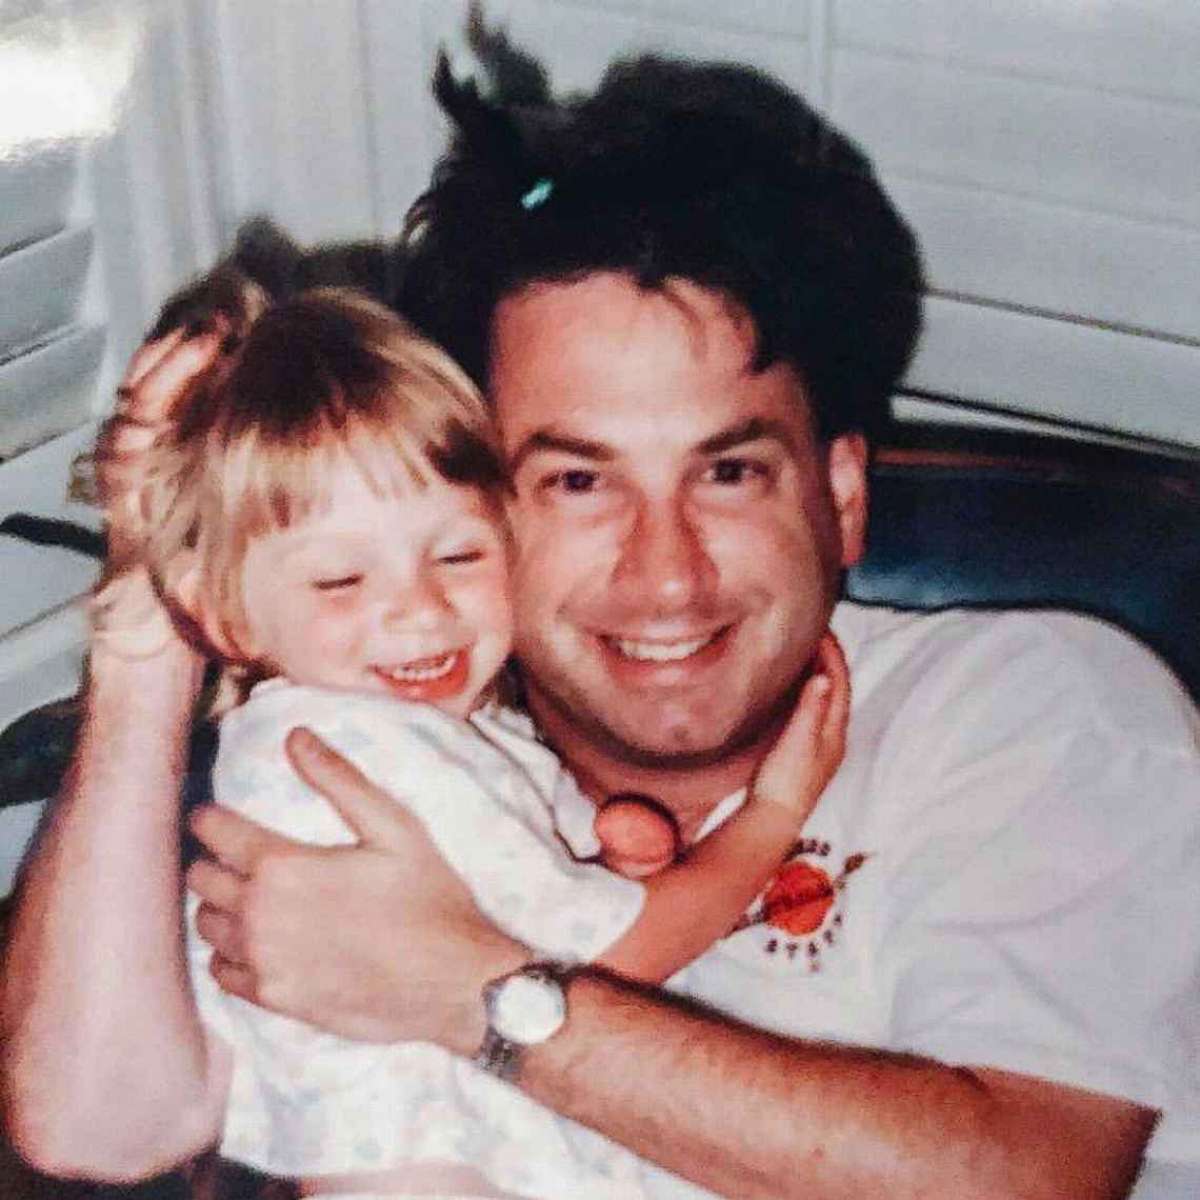 PHOTO: Sydney Mesher is pictured with her father, Page Mesher, in an undated handout photo.